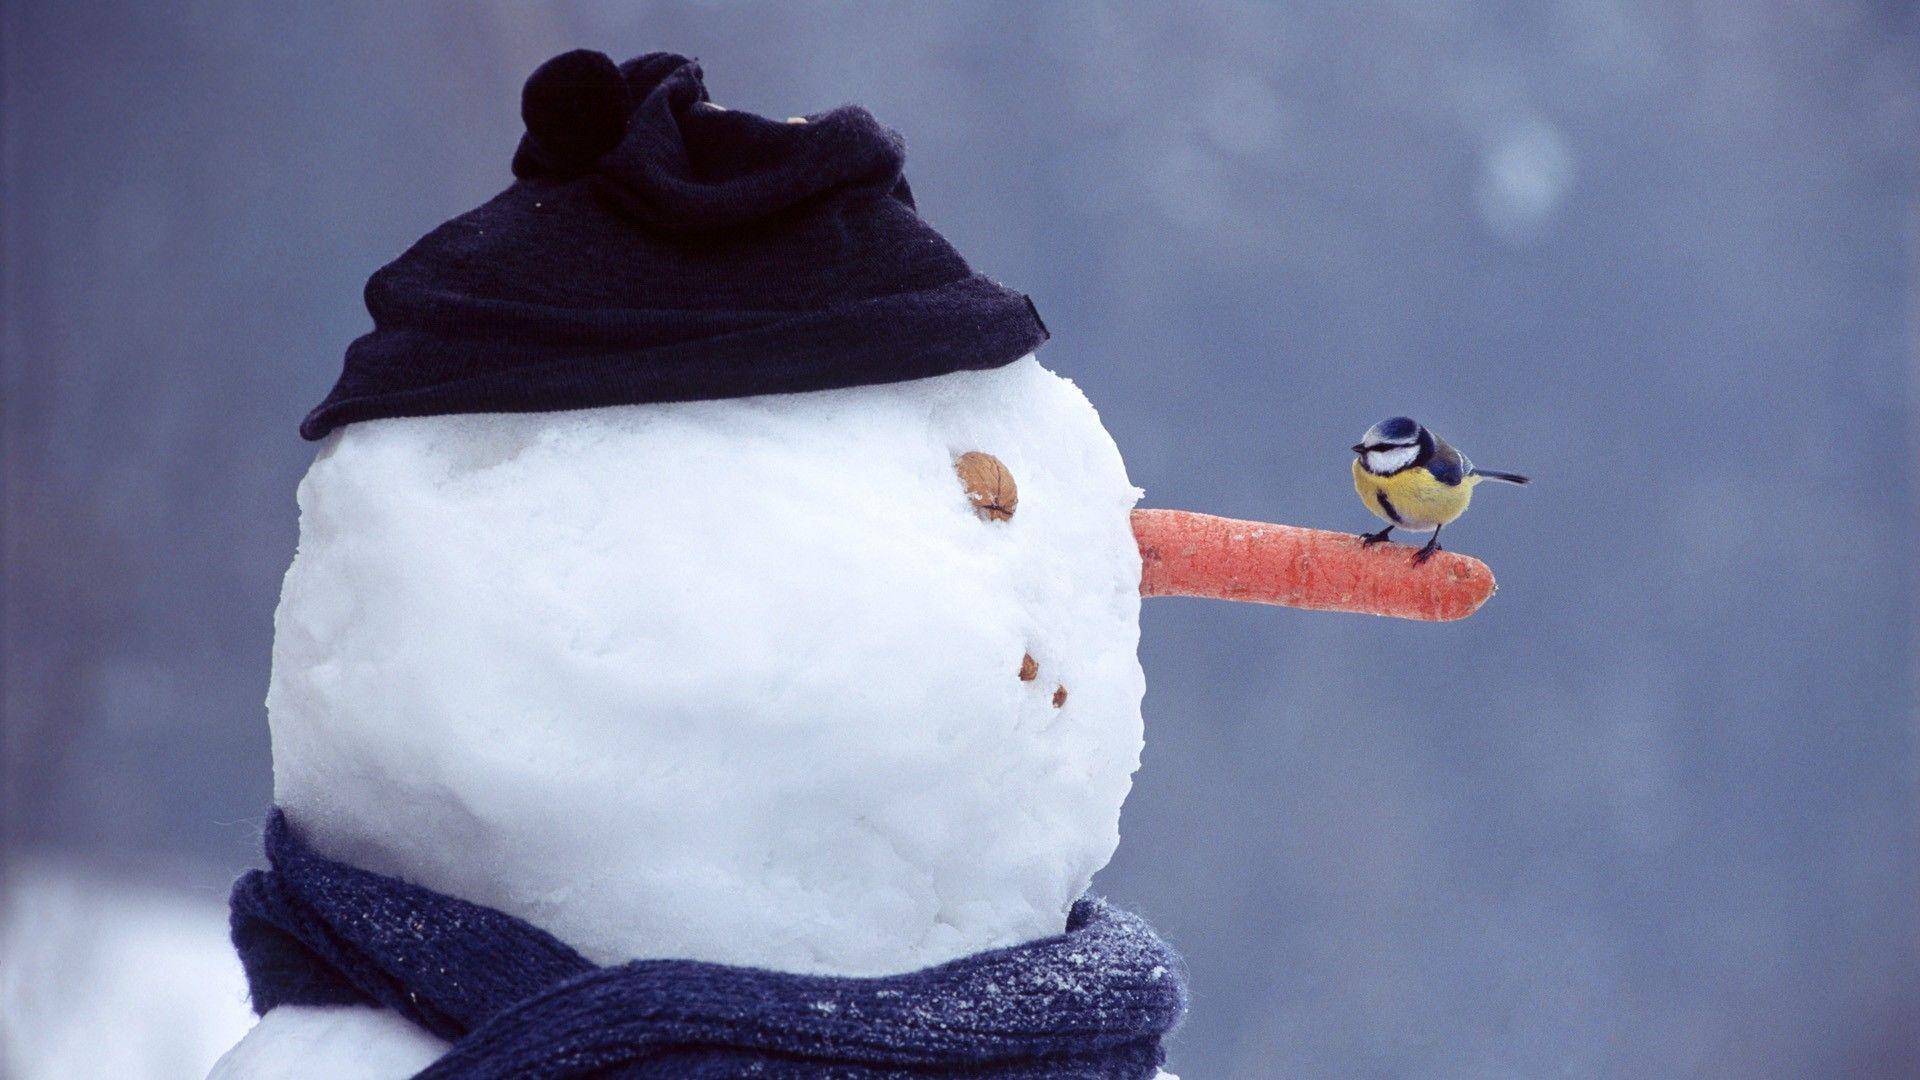 Real Snowman Background image gallery. Snow and Snow Creations